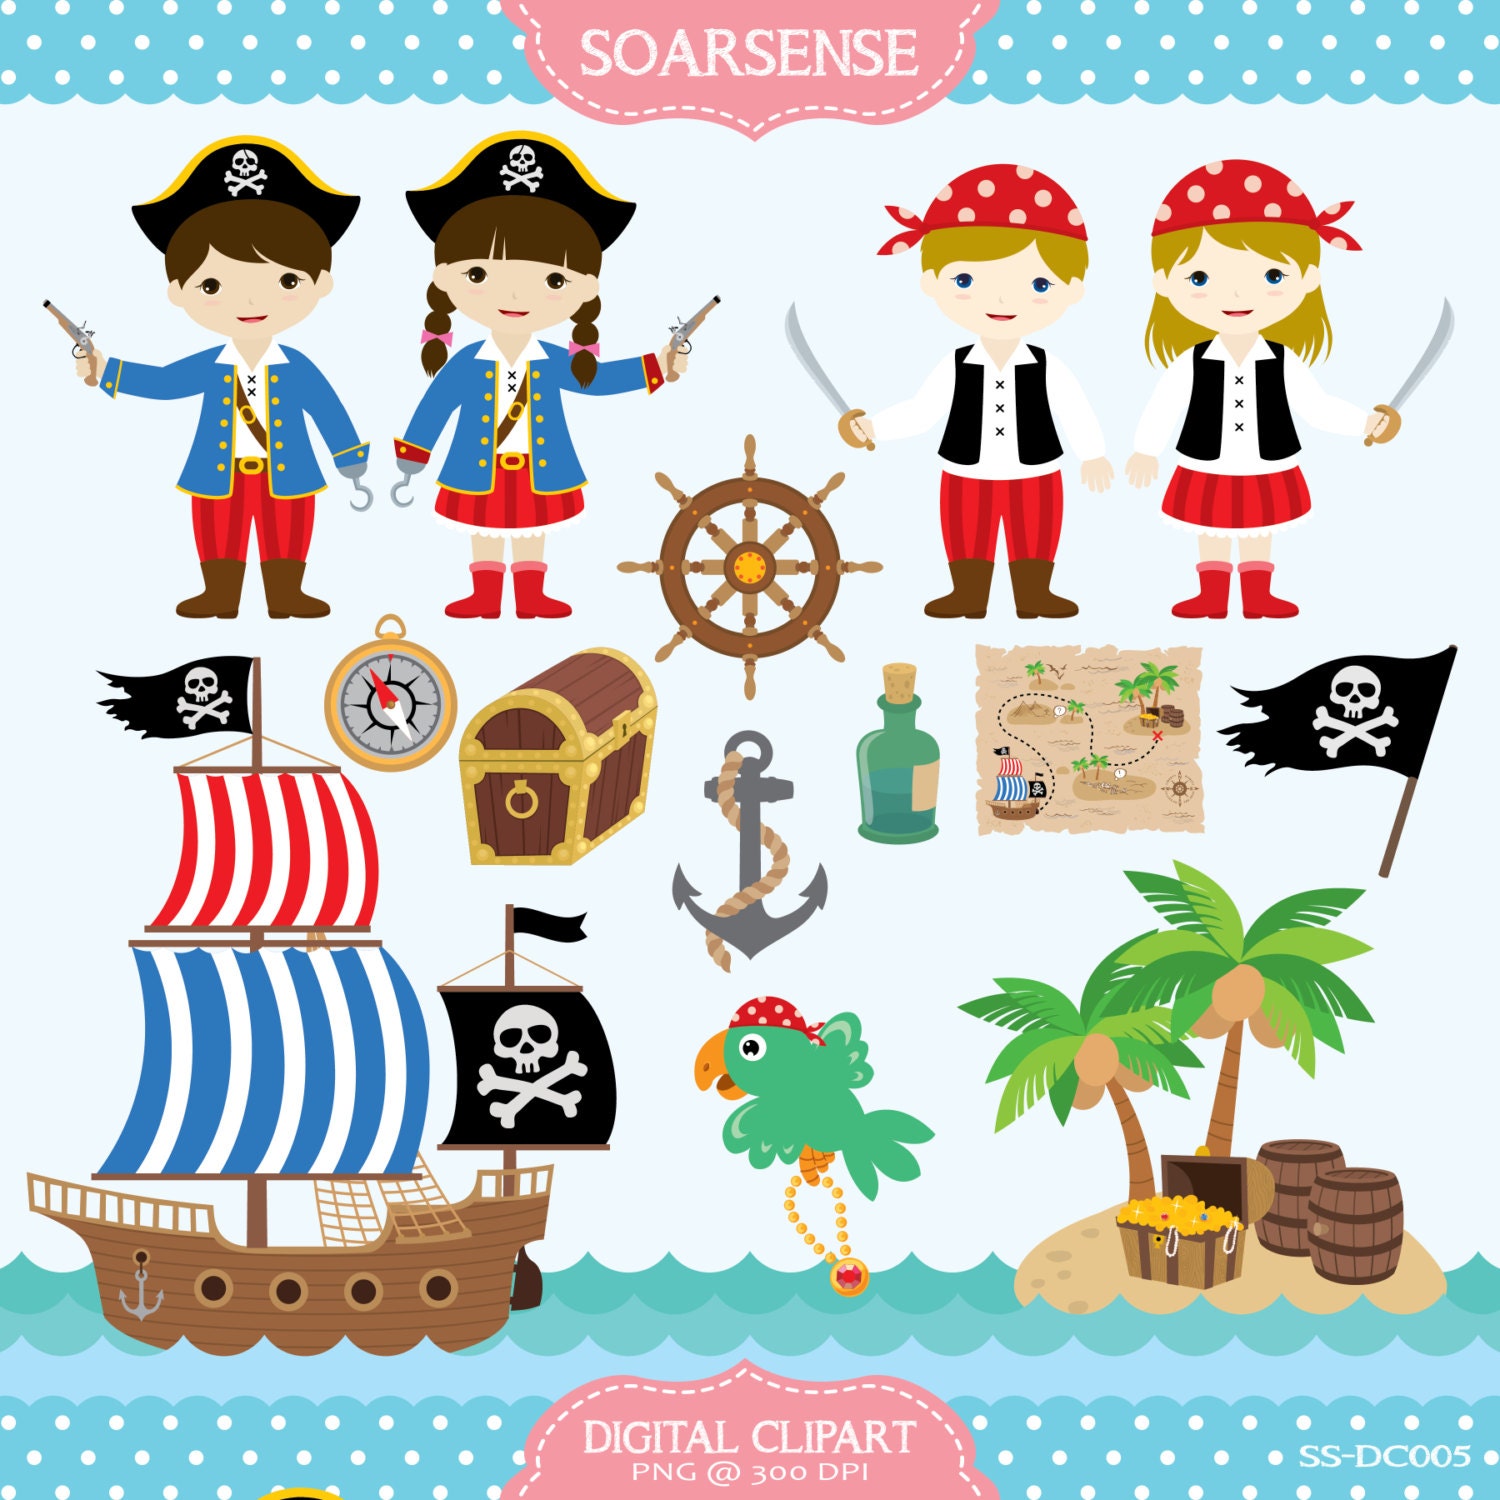 pirate map clipart - photo #47